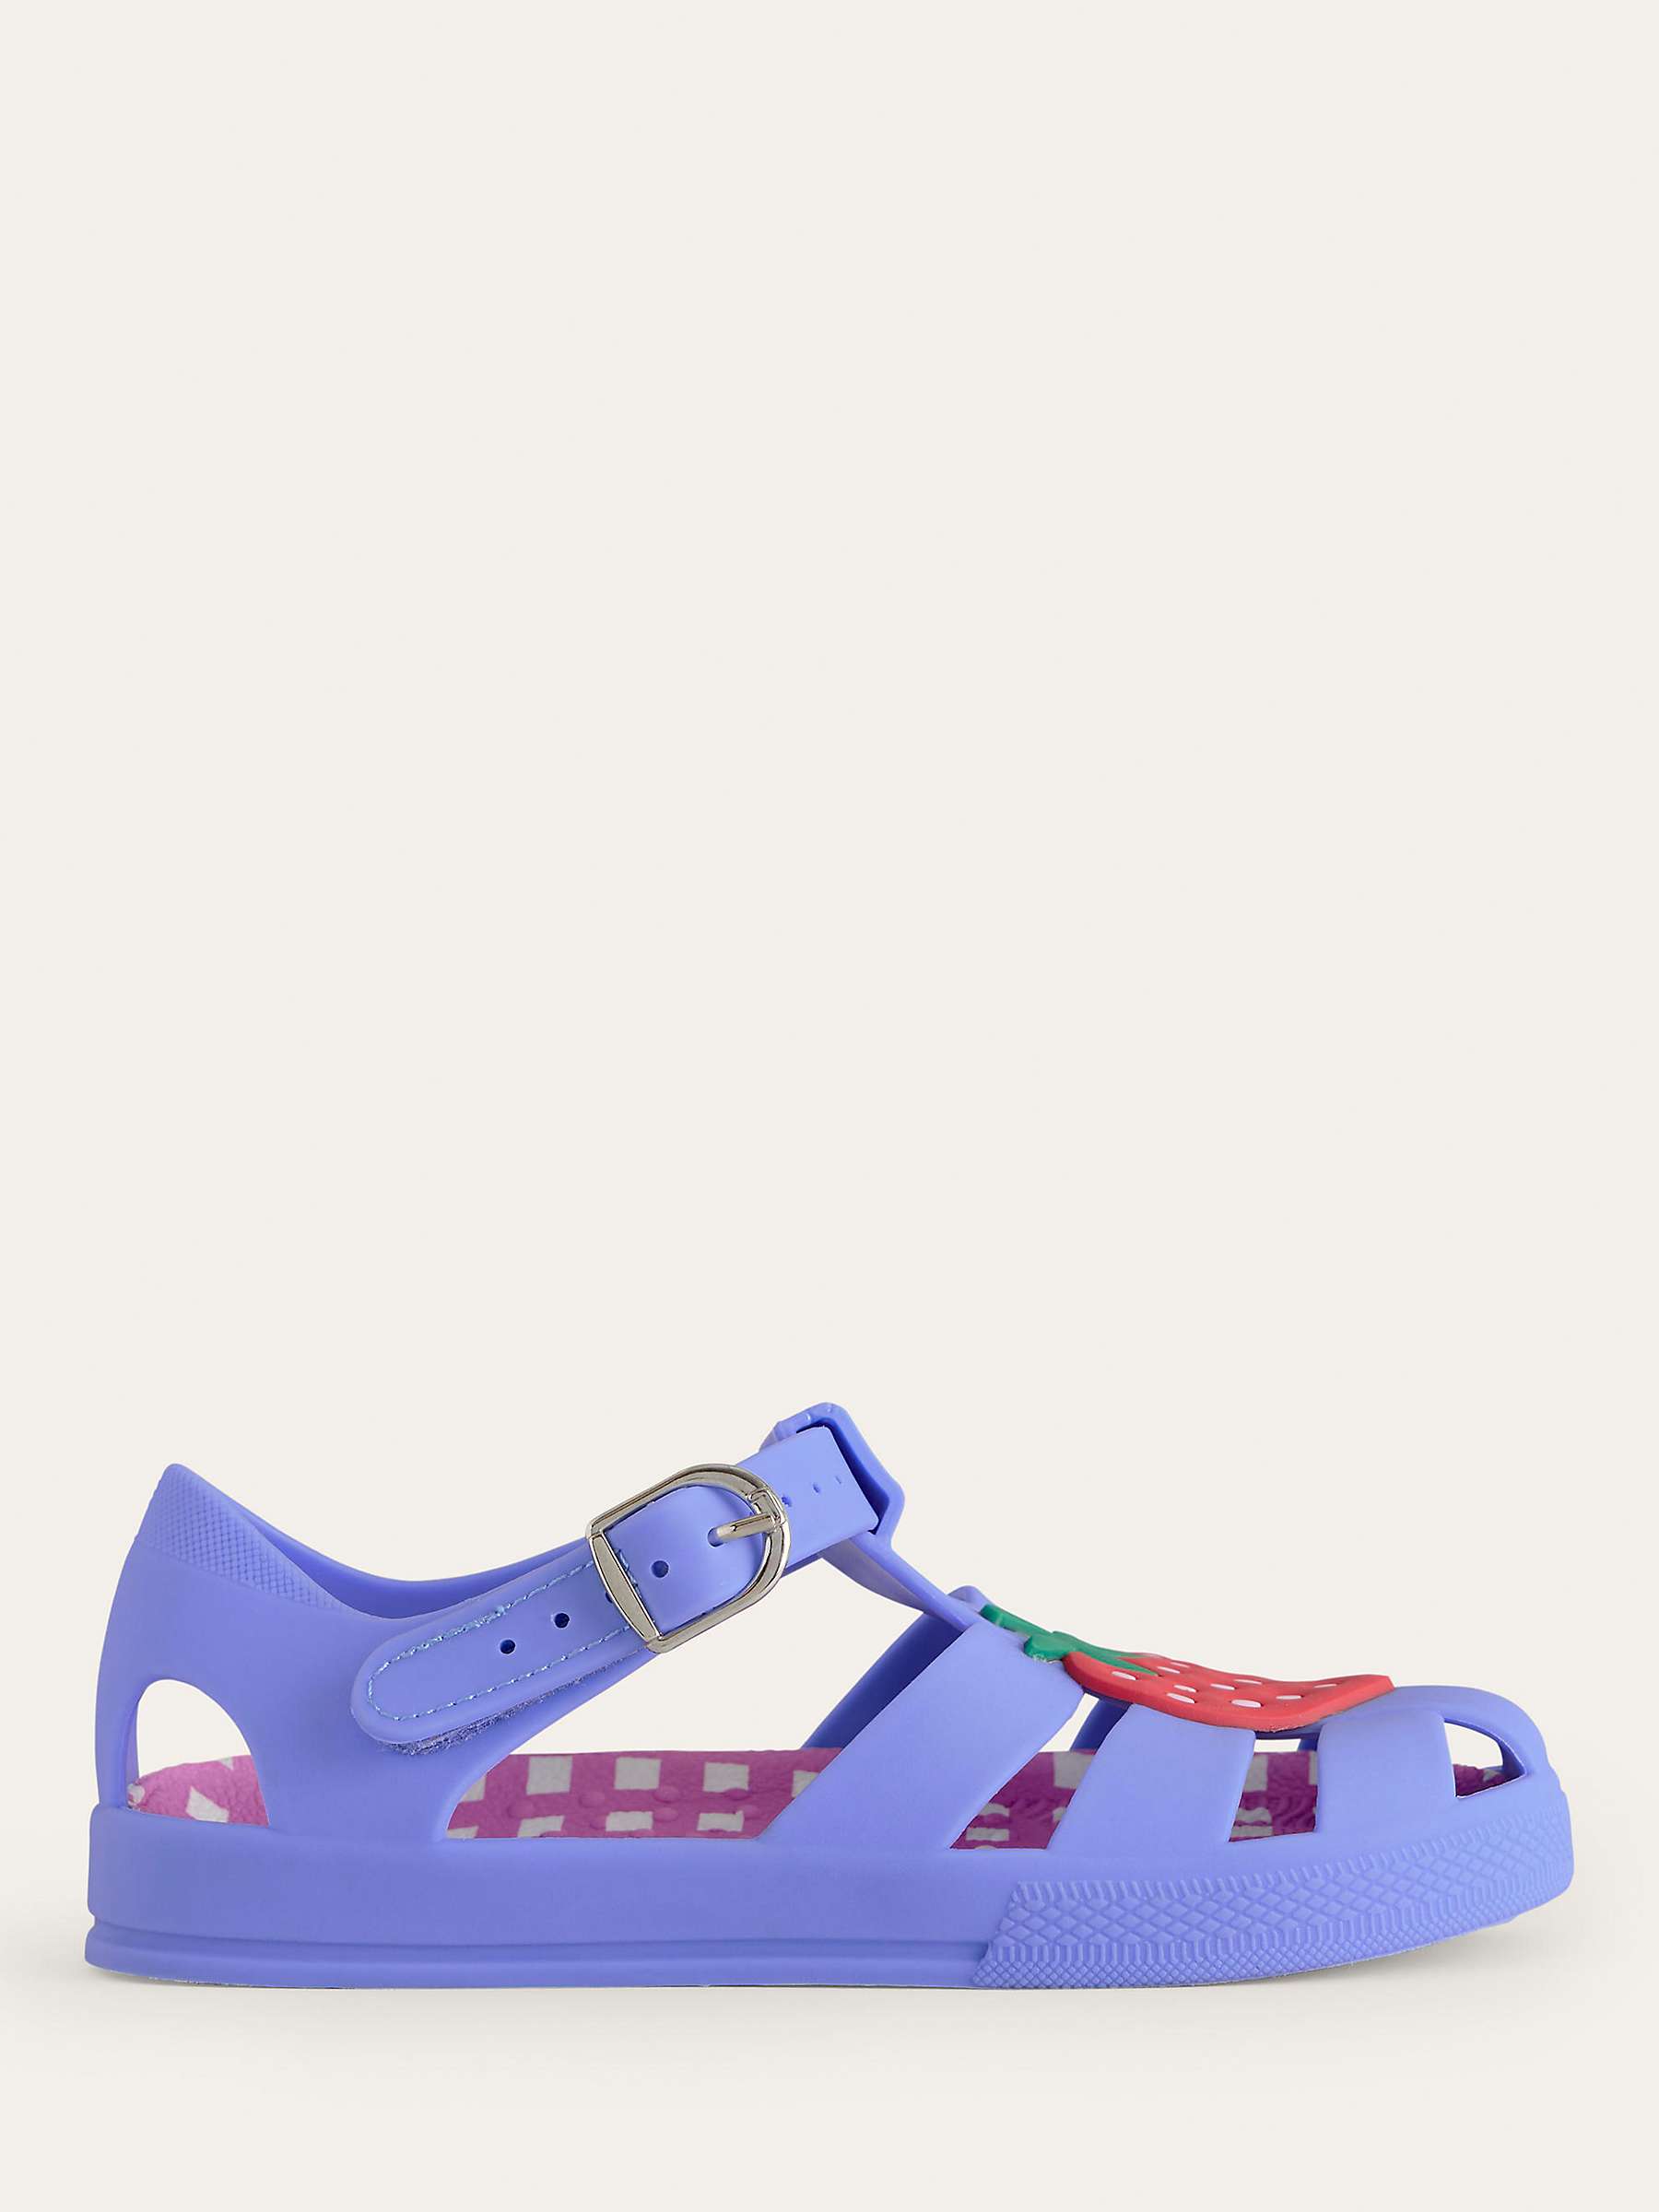 Buy Mini Boden Kids' Strawberry Jelly Shoes, Purple Online at johnlewis.com